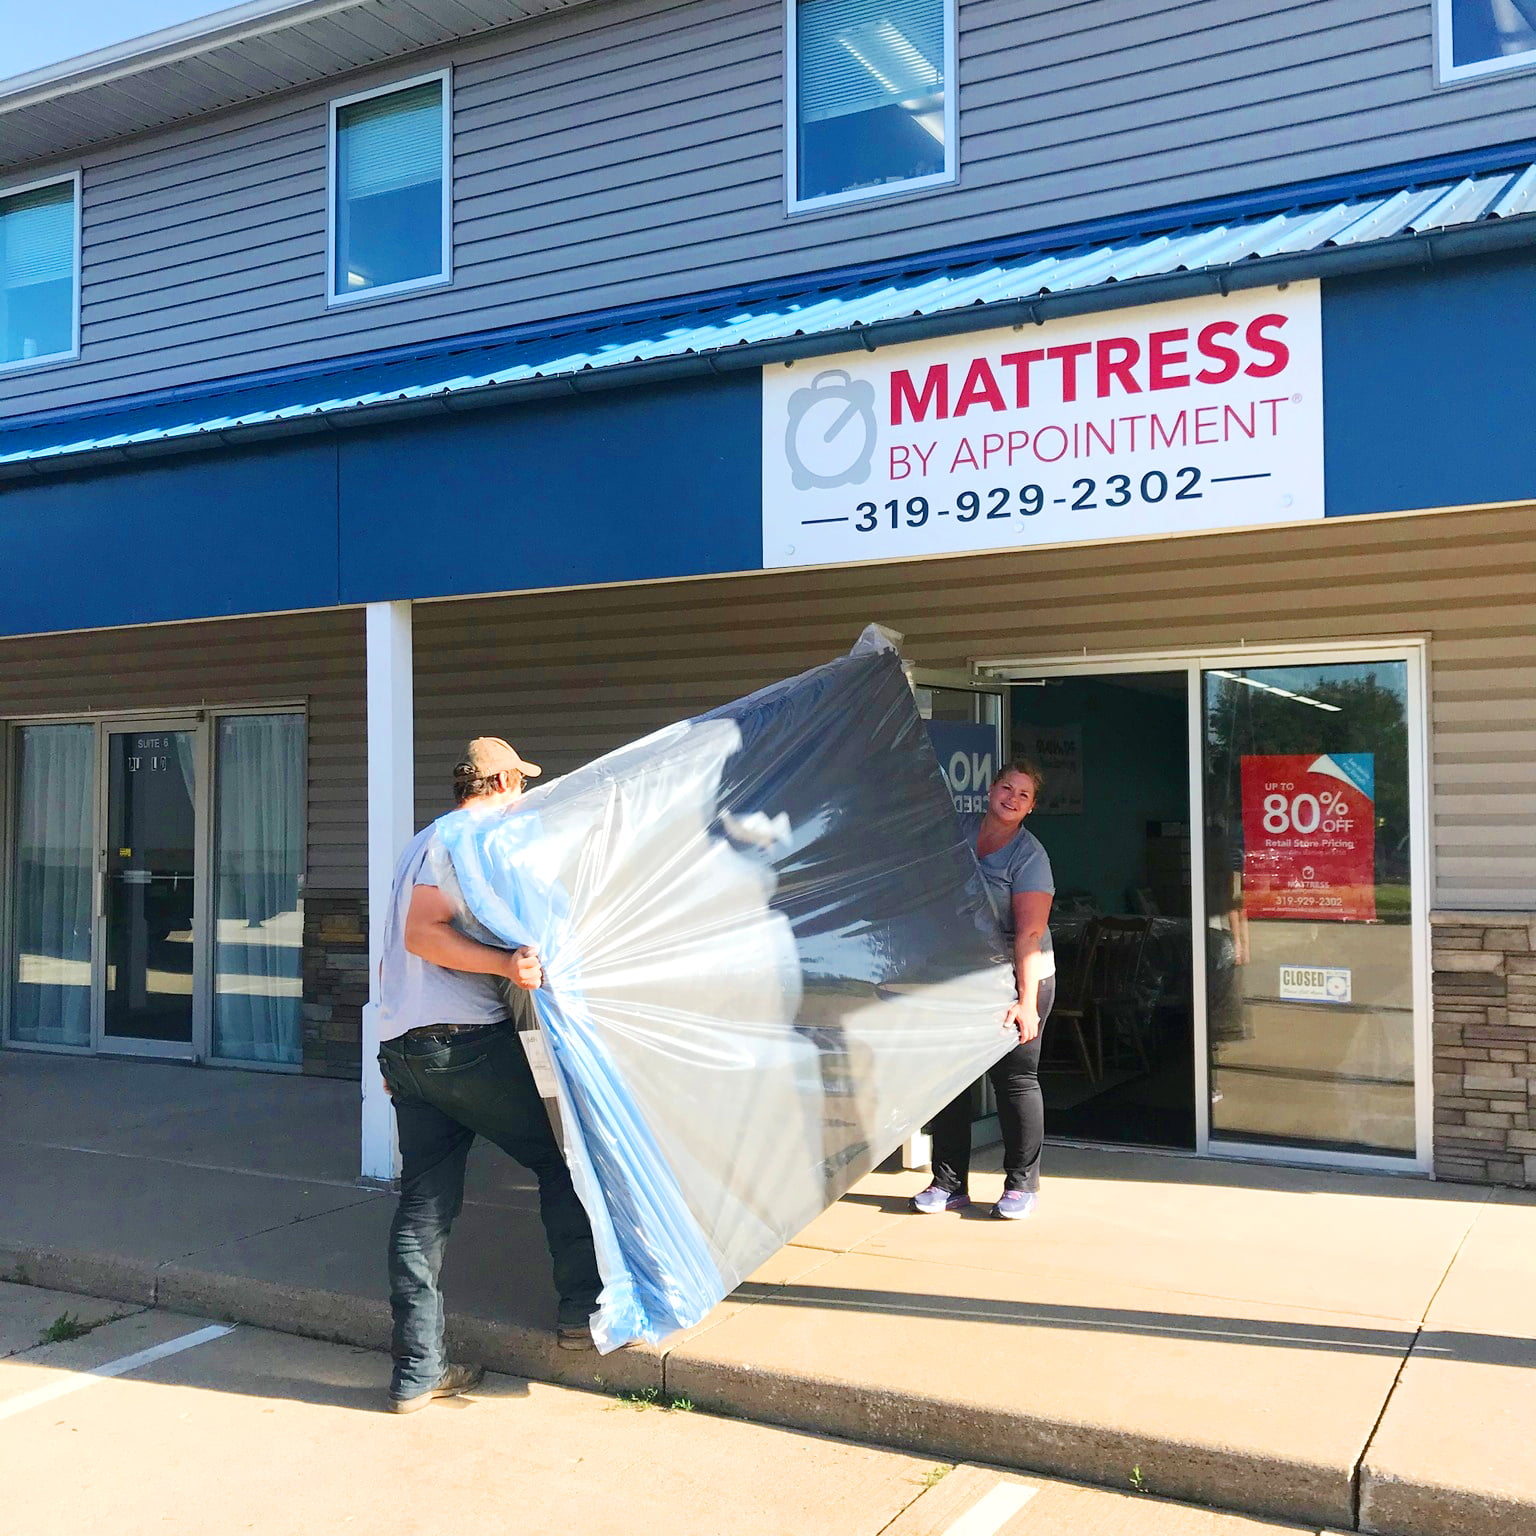 A man and a woman carrying a new mattress into Mattress by Appointment in Sheboygan, WI.